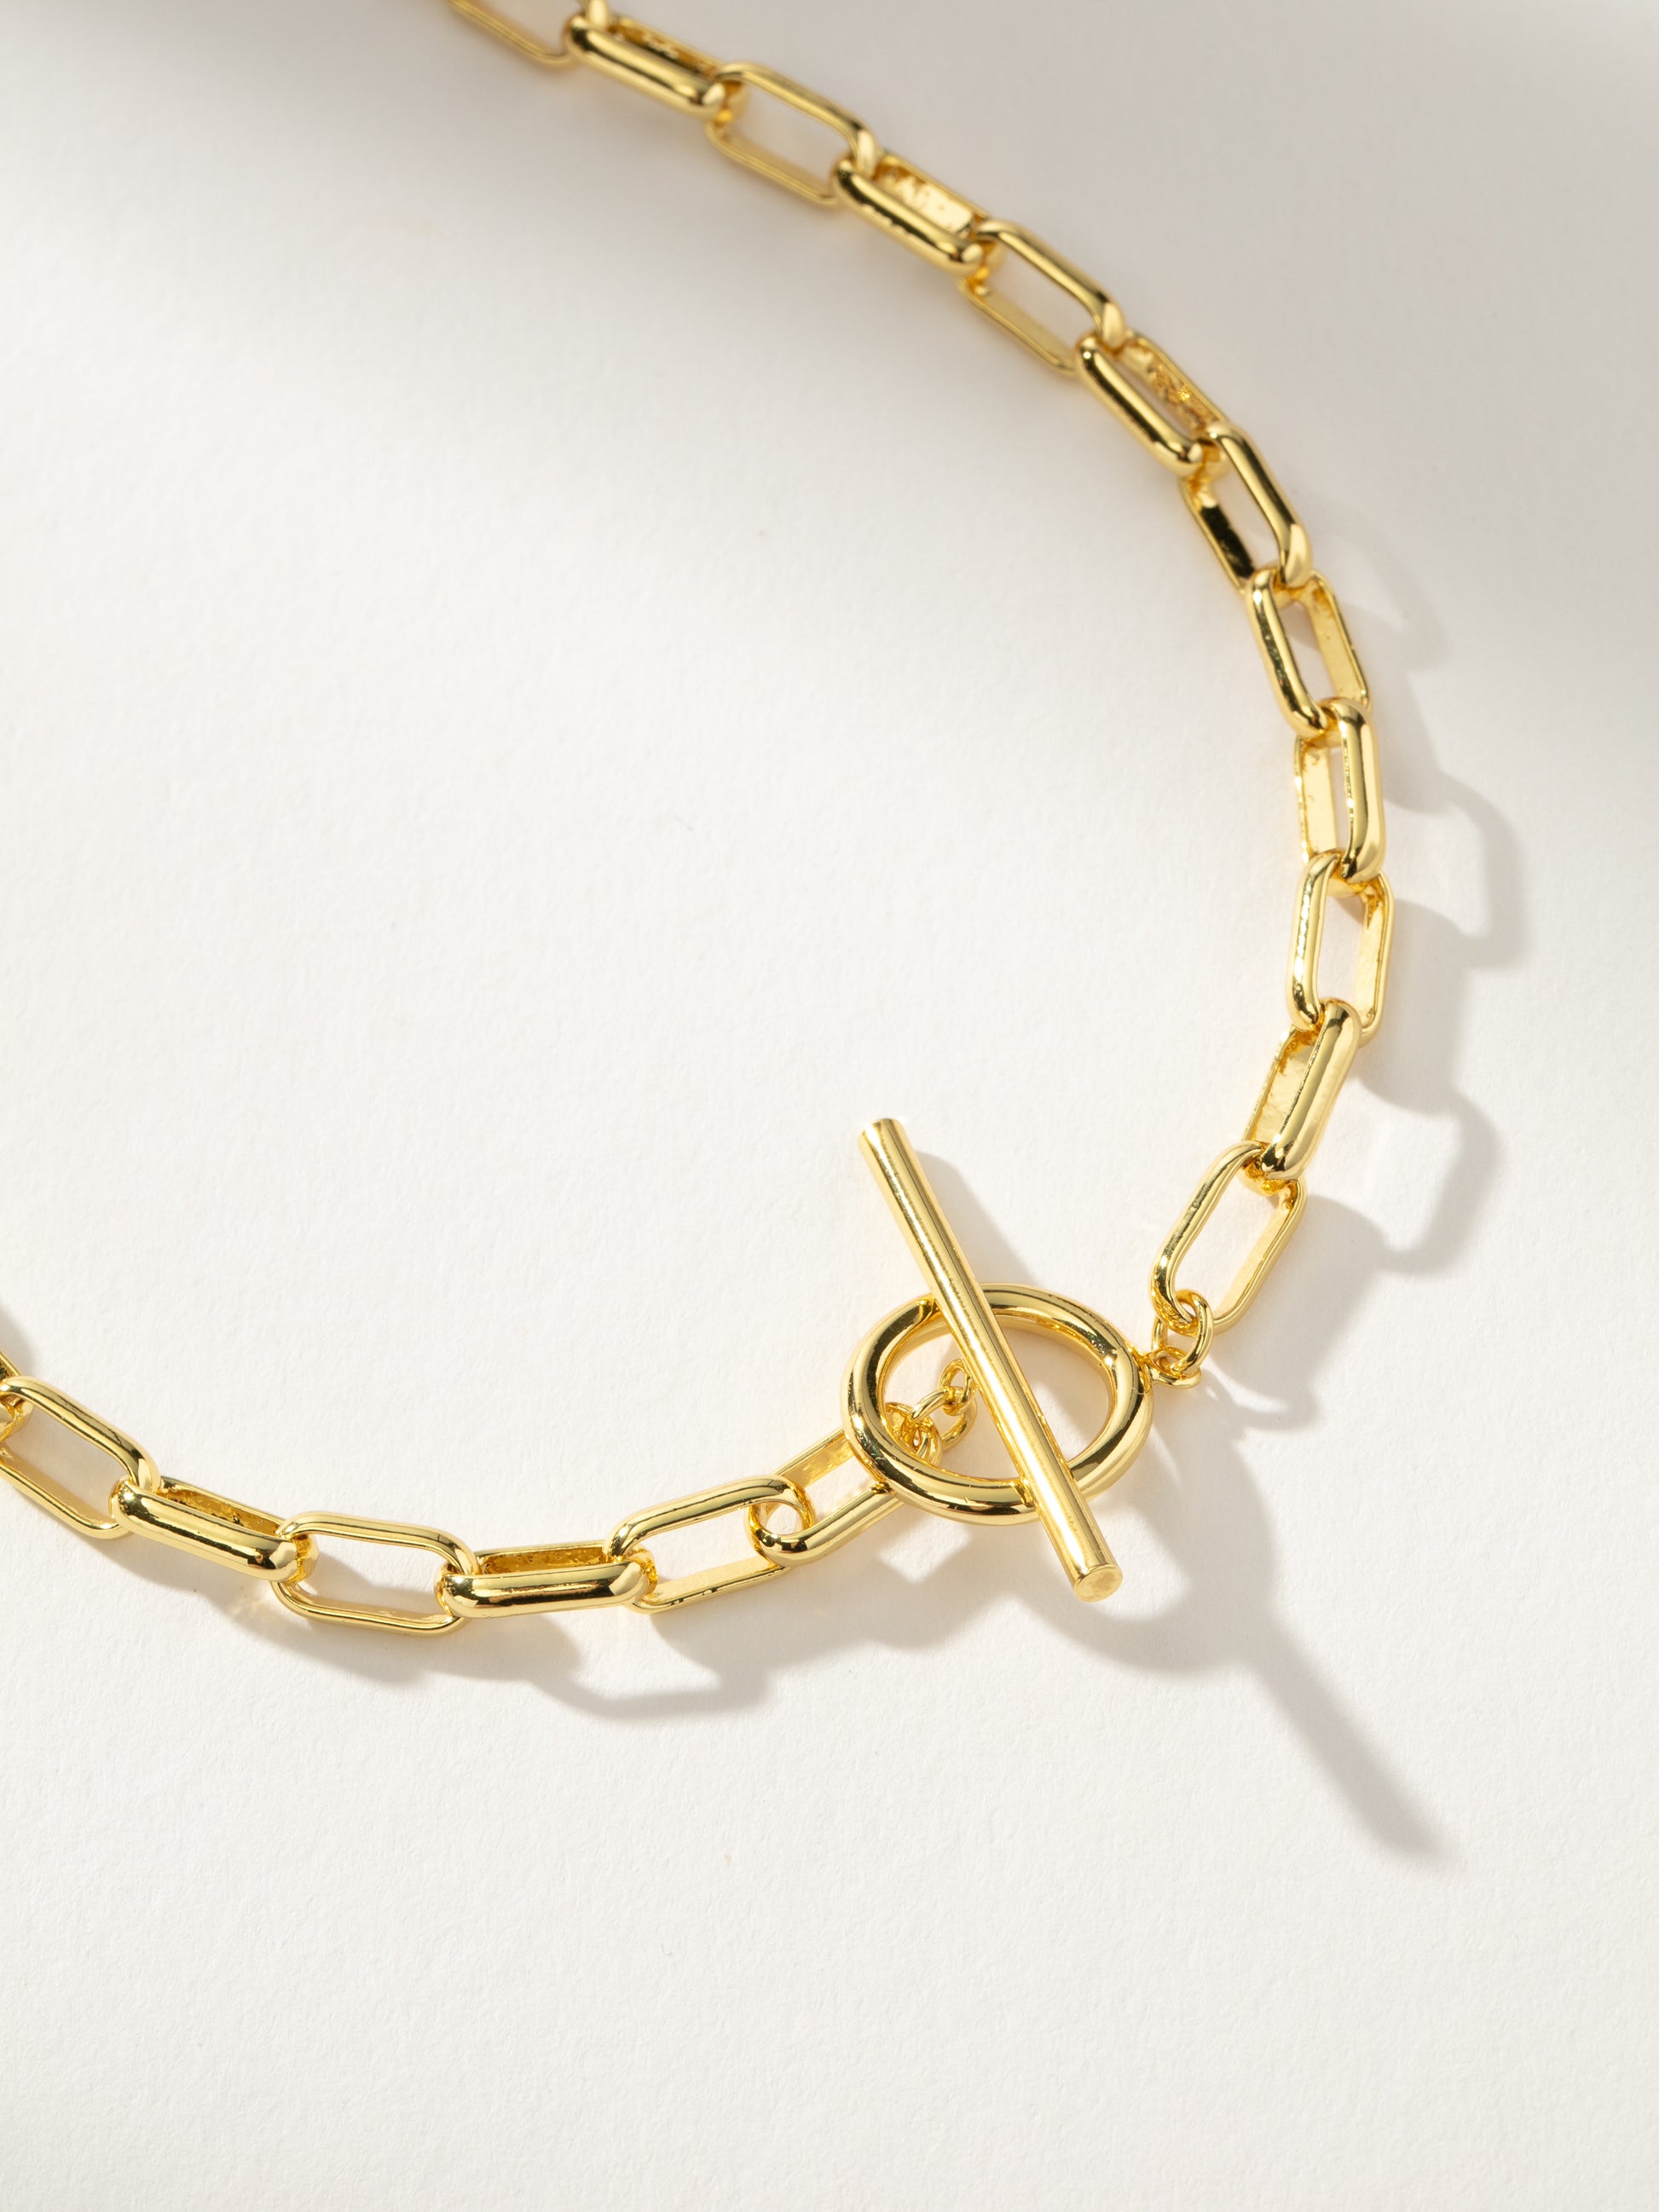 Staple Chain Necklace | Gold | Product Detail Image | Uncommon James